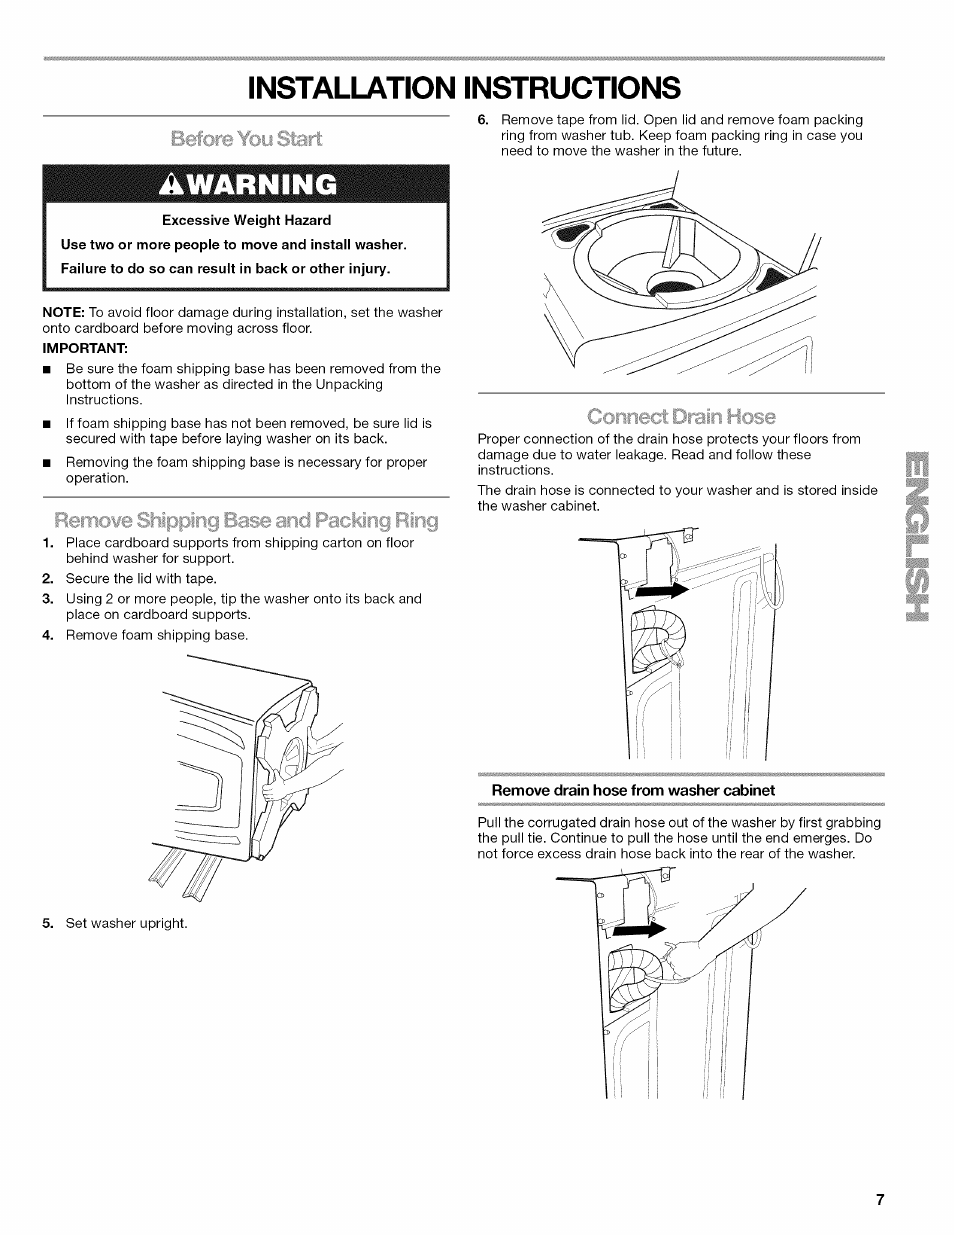 Installation instructions, Awarning, Remove drain hose from washer ...